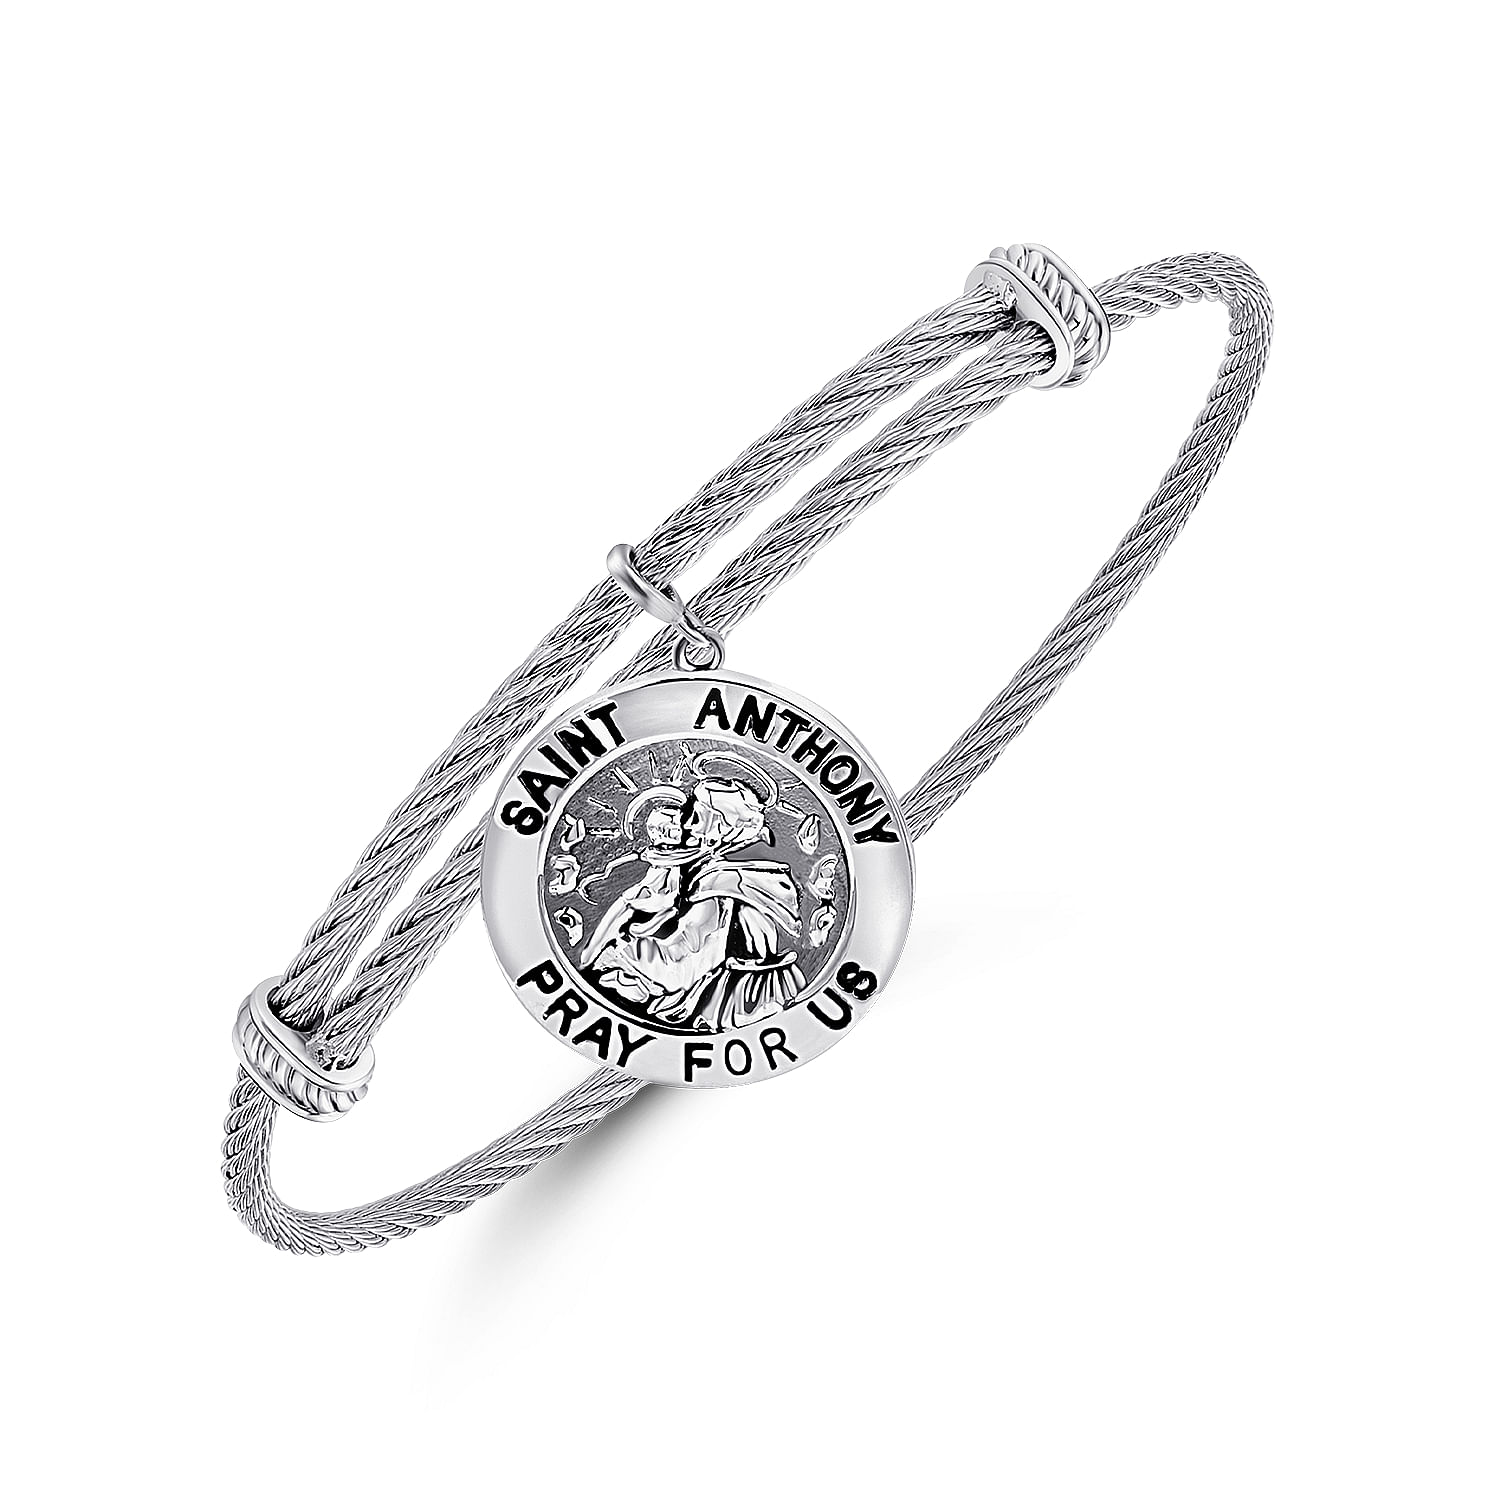 Adjustable Twisted Cable Stainless Steel Bangle with Sterling Silver St. Anthony Charm